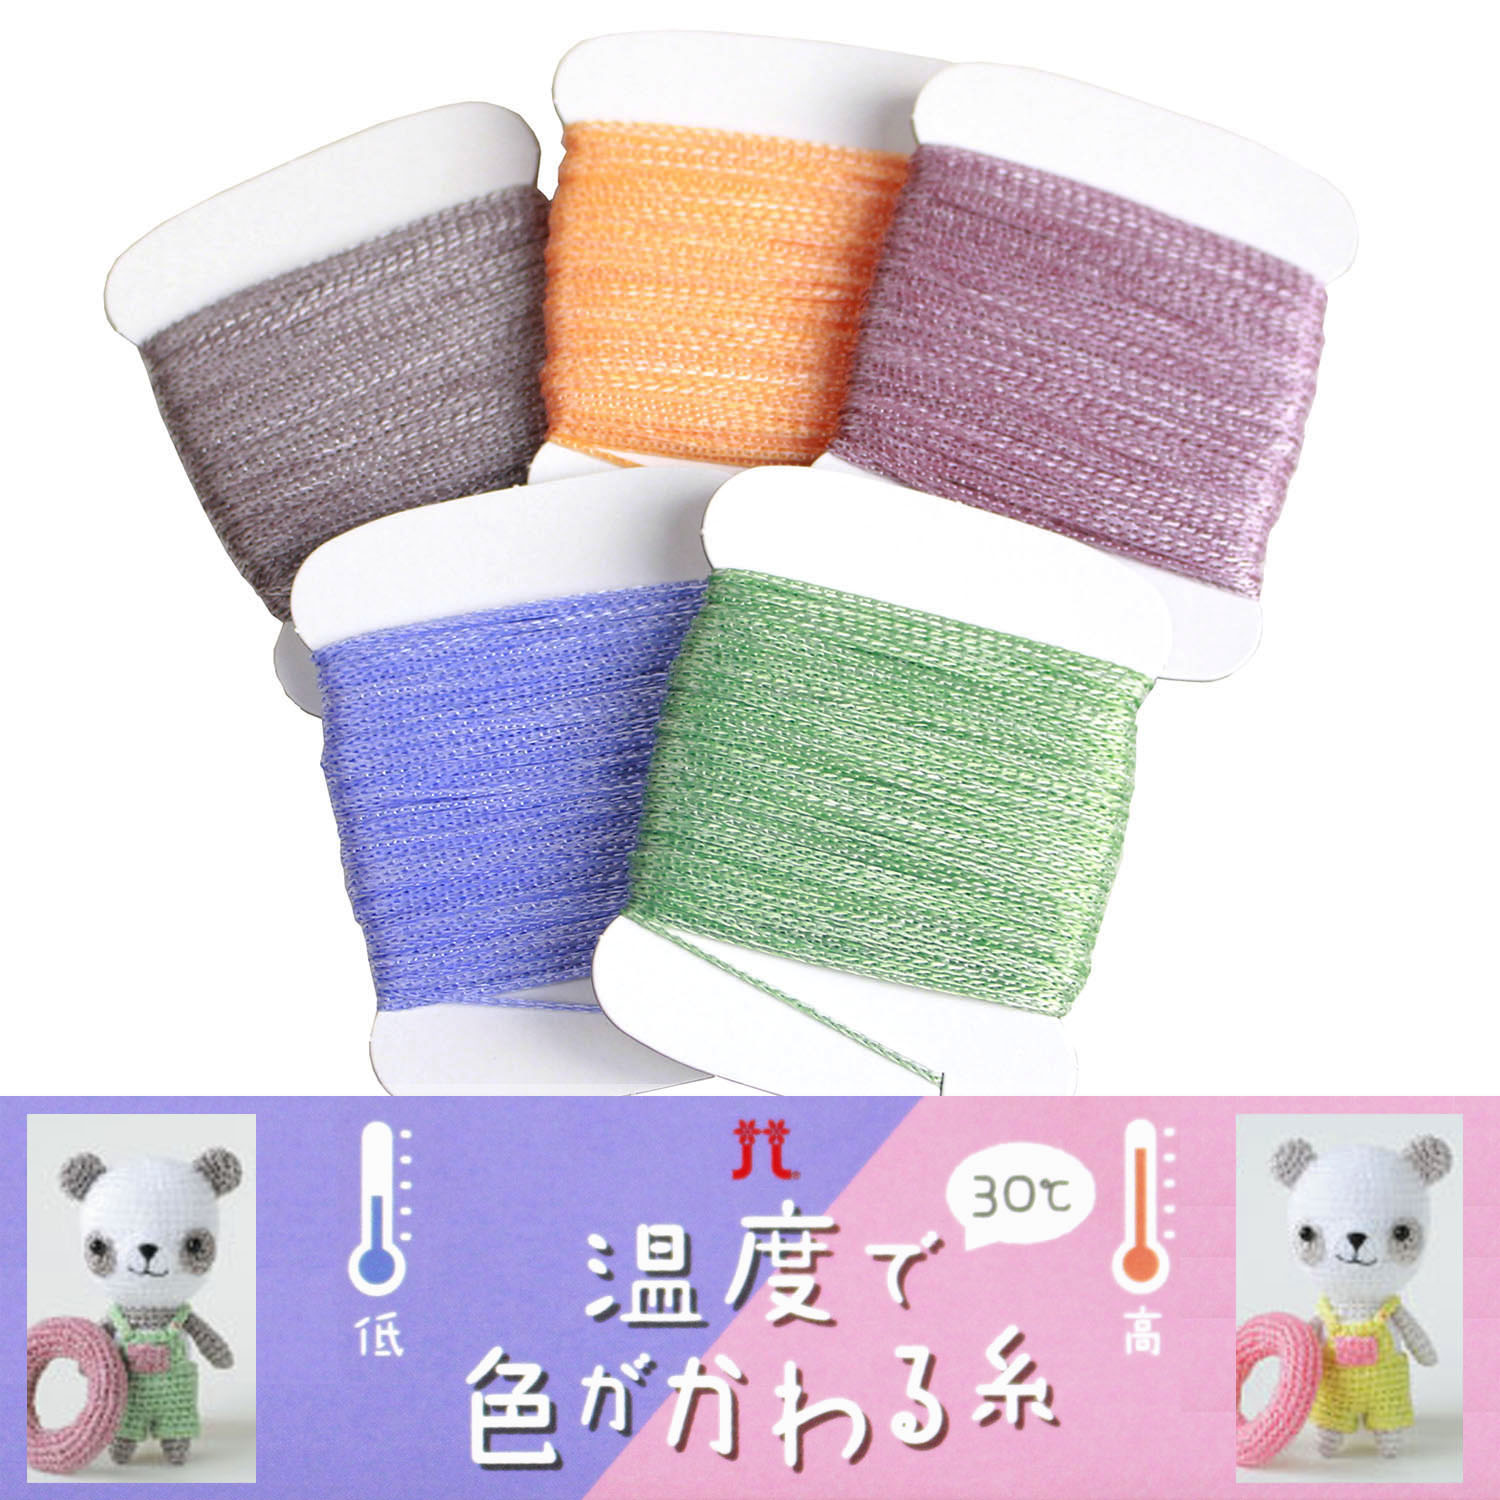 H3322 Yarn that changes color with temperature 30℃ Hand knitting yarn 10g (pcs)